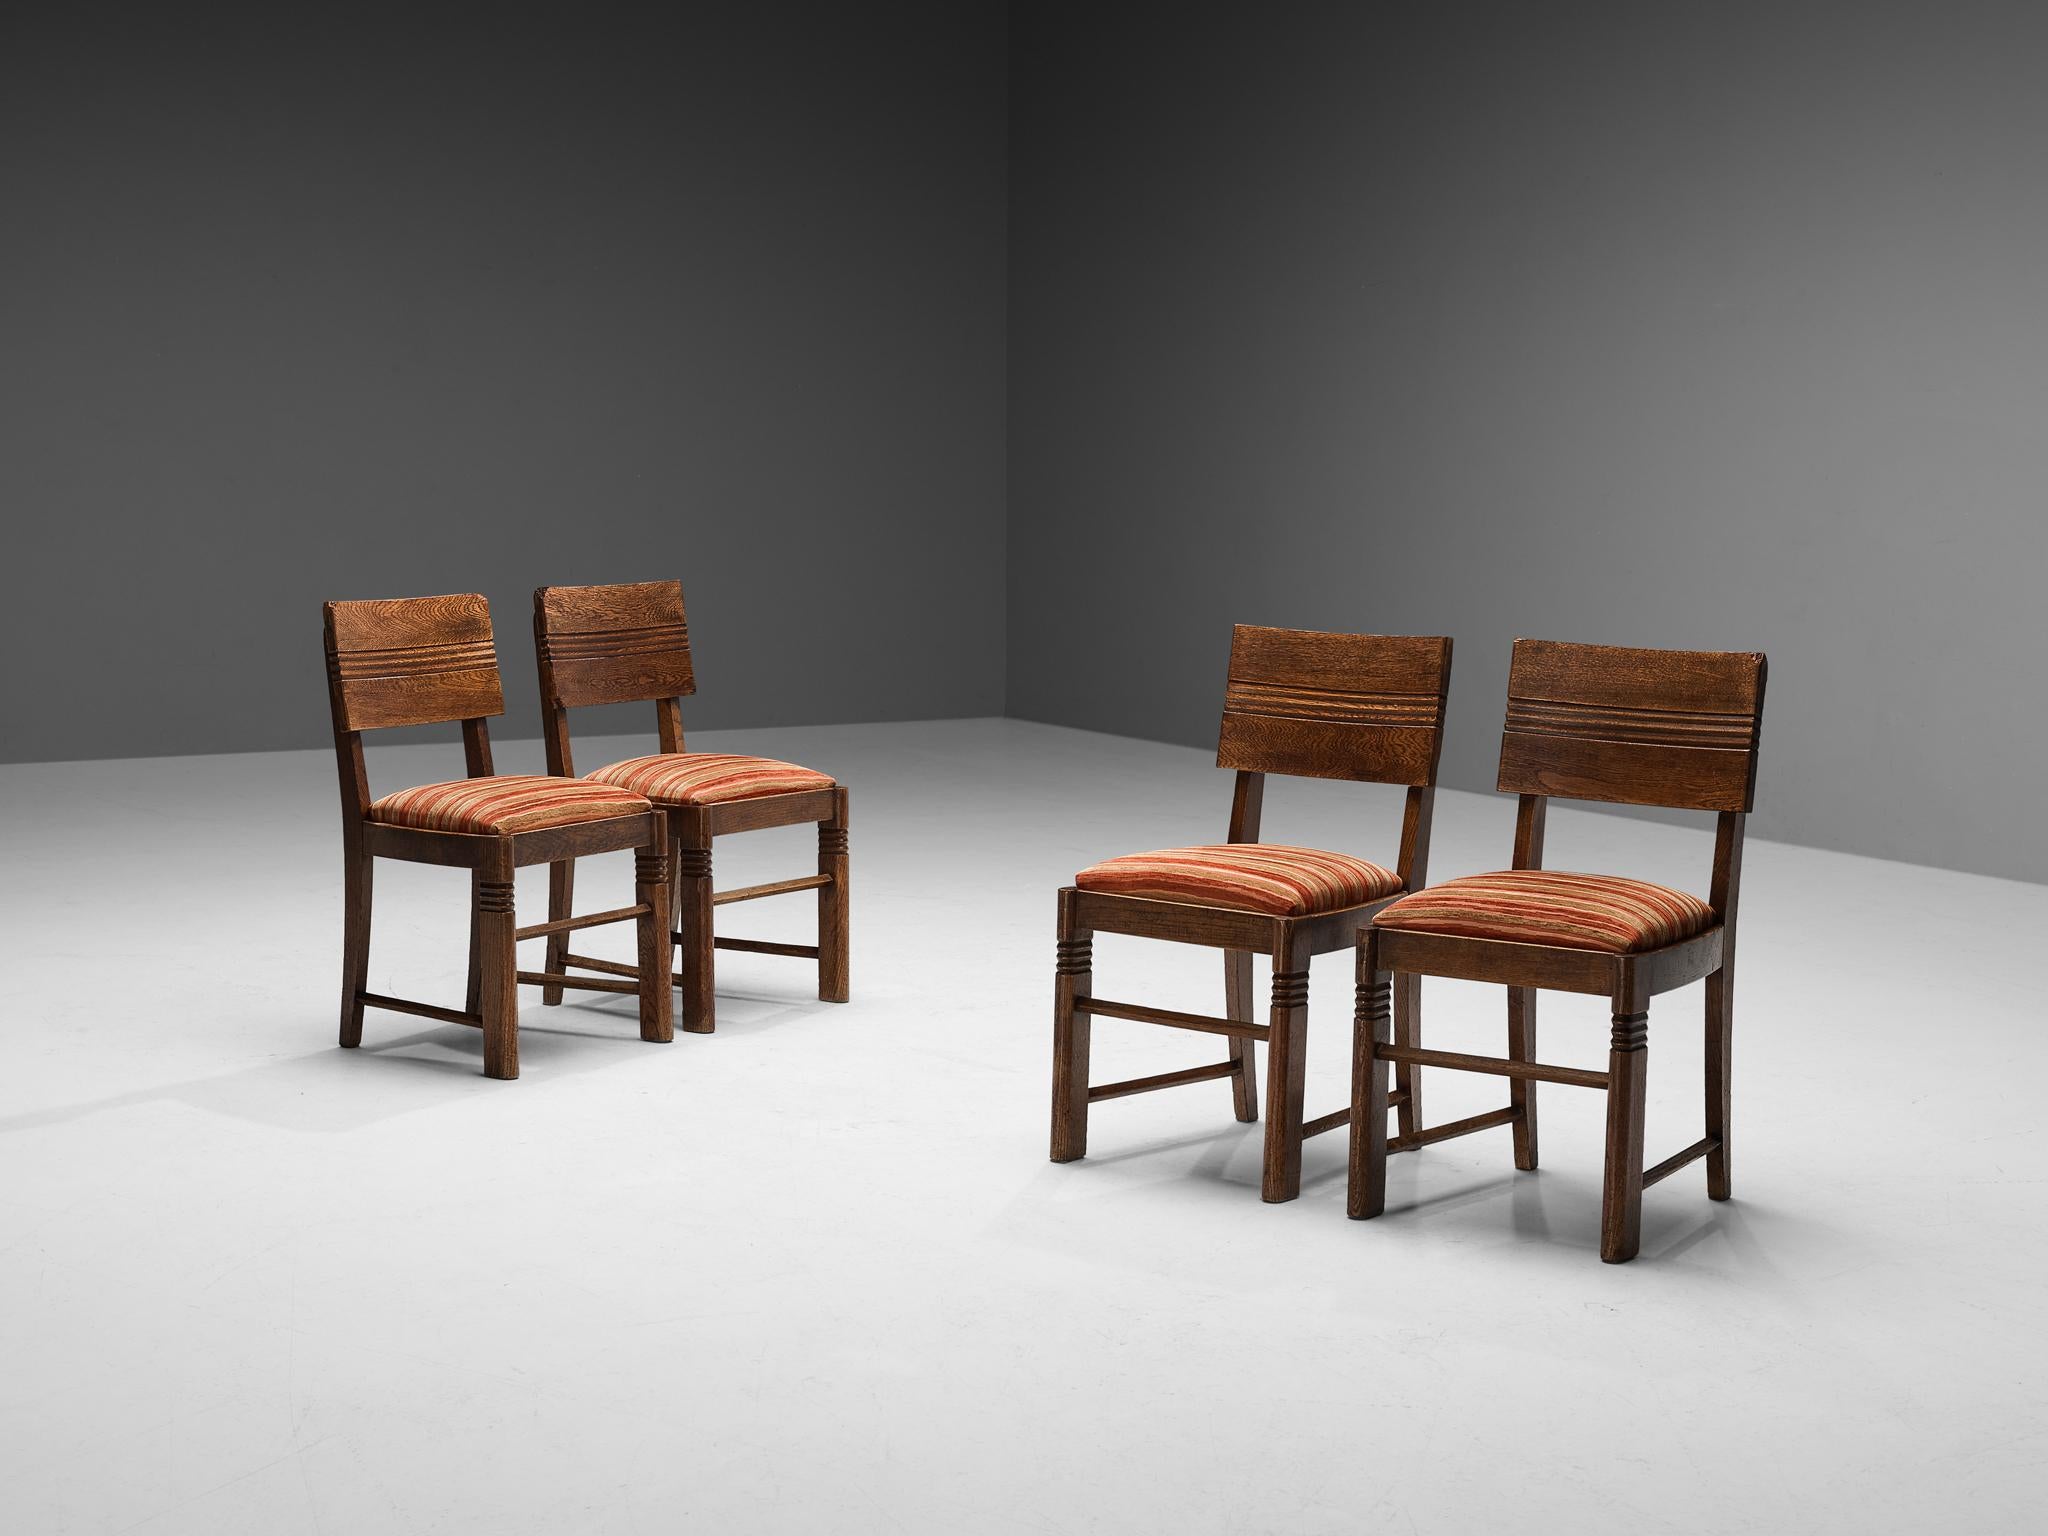 Charles Dudouyt, set of four dining chairs, fabric, oak, France, 1930s 

These beautifully designed chairs are created in one of the most influential periods for the arts namely the Art Deco Movement. The oak frame is based on round edges and